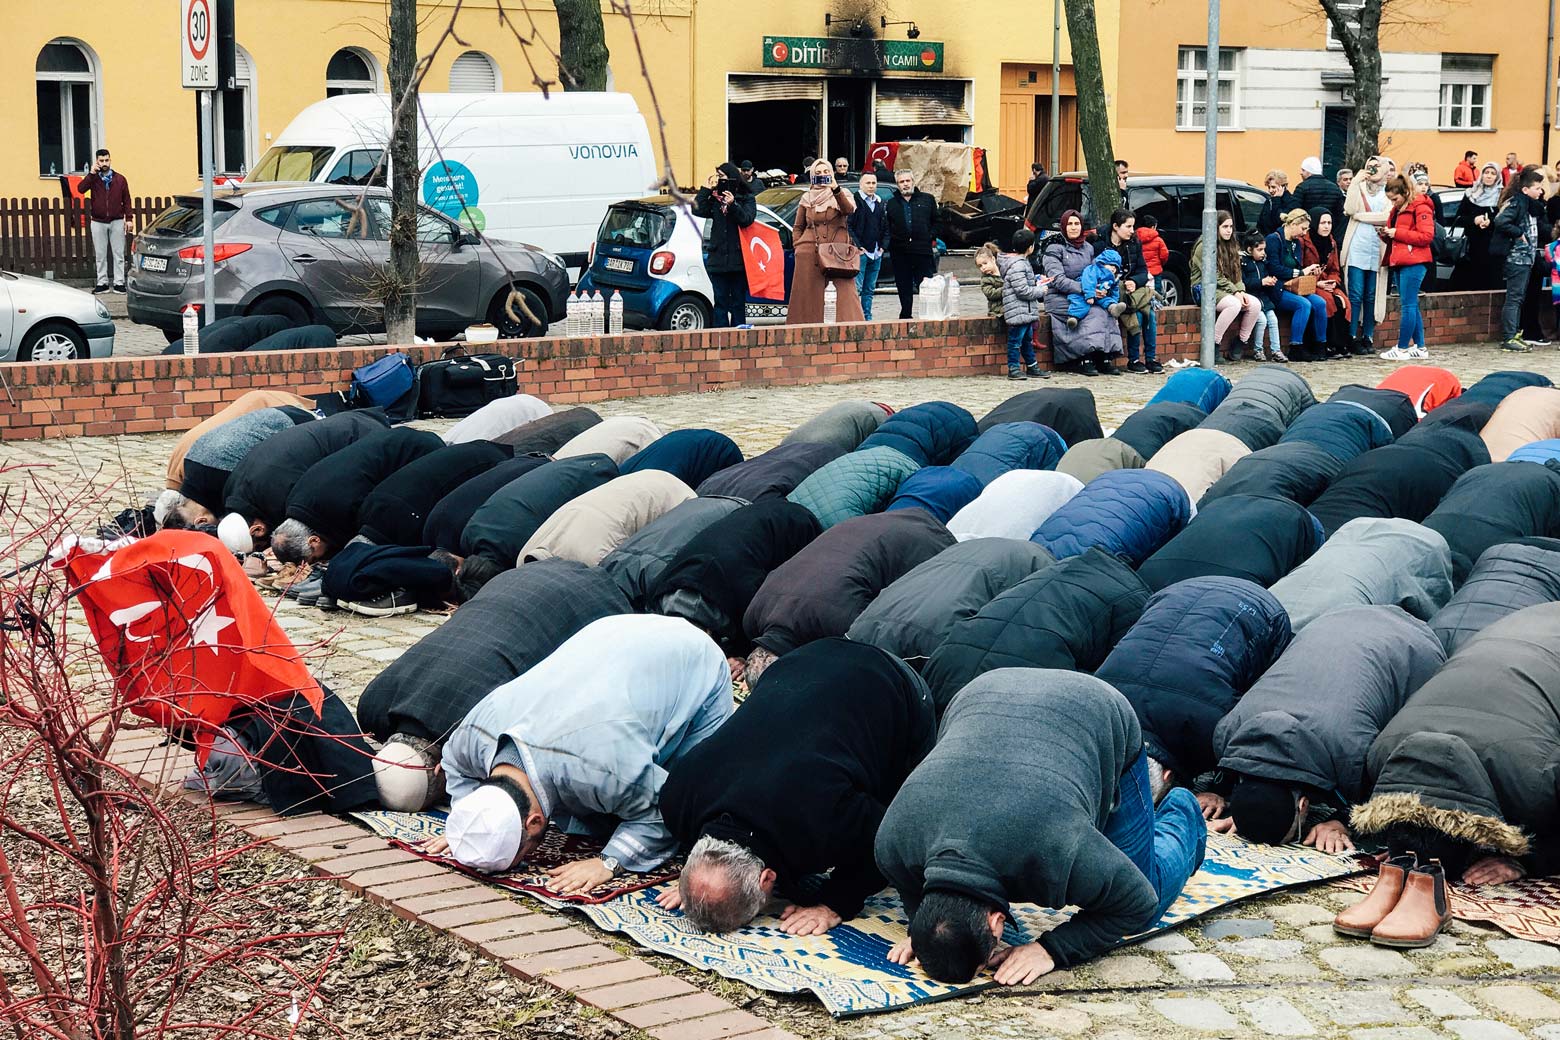 People pray near a mosque after it was destroyed by a fire in Berlin on March 11.